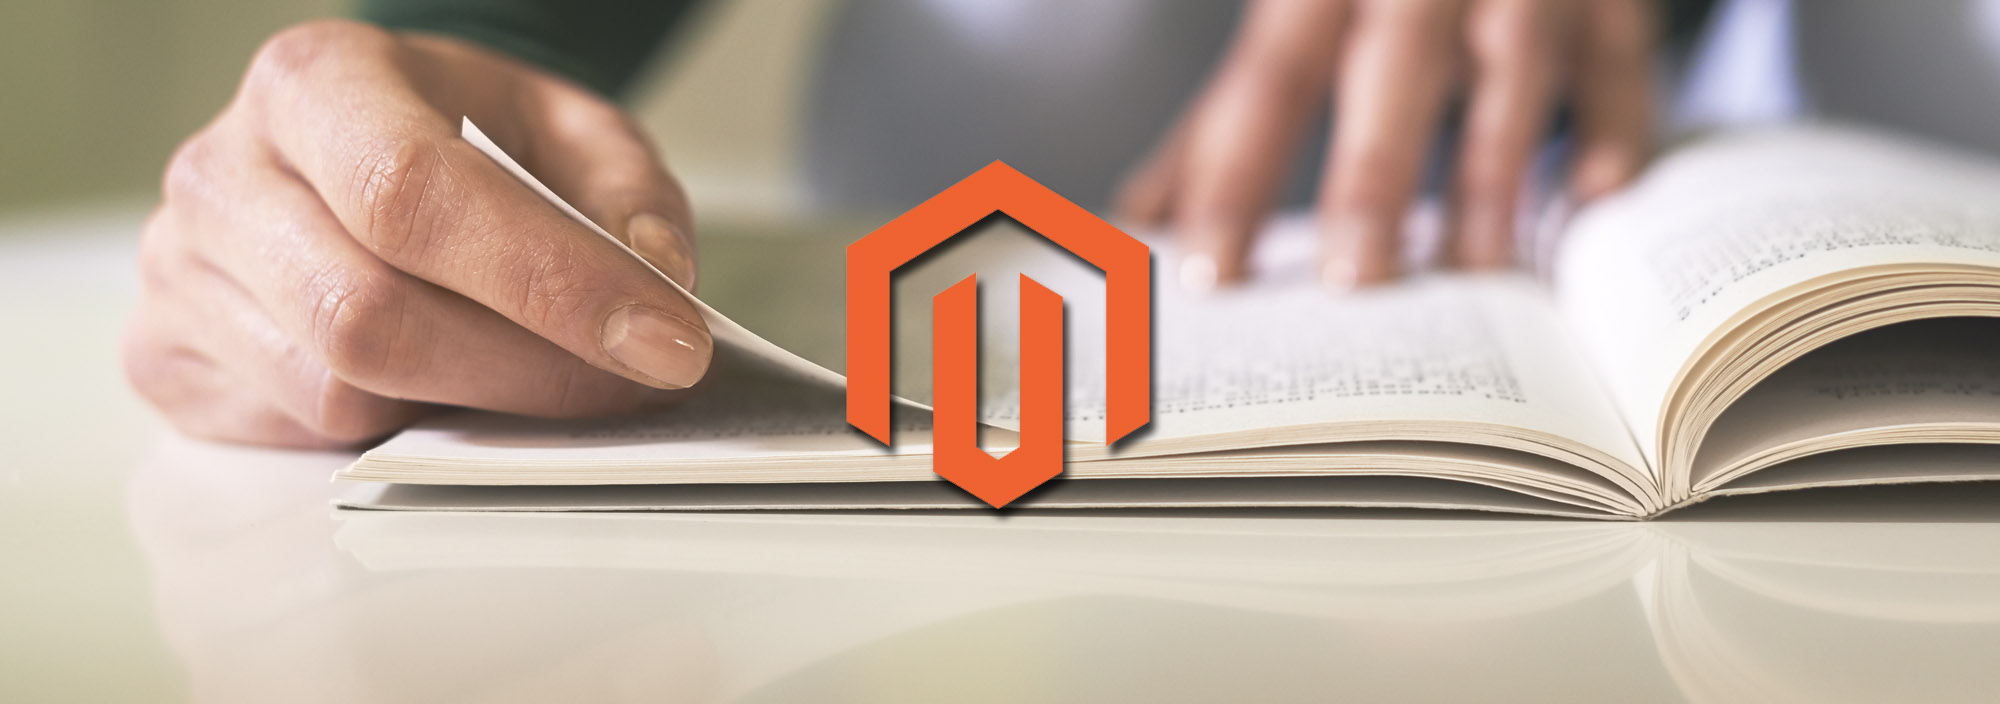 Top 12 Magento Extensions that Every Magento Store Needs